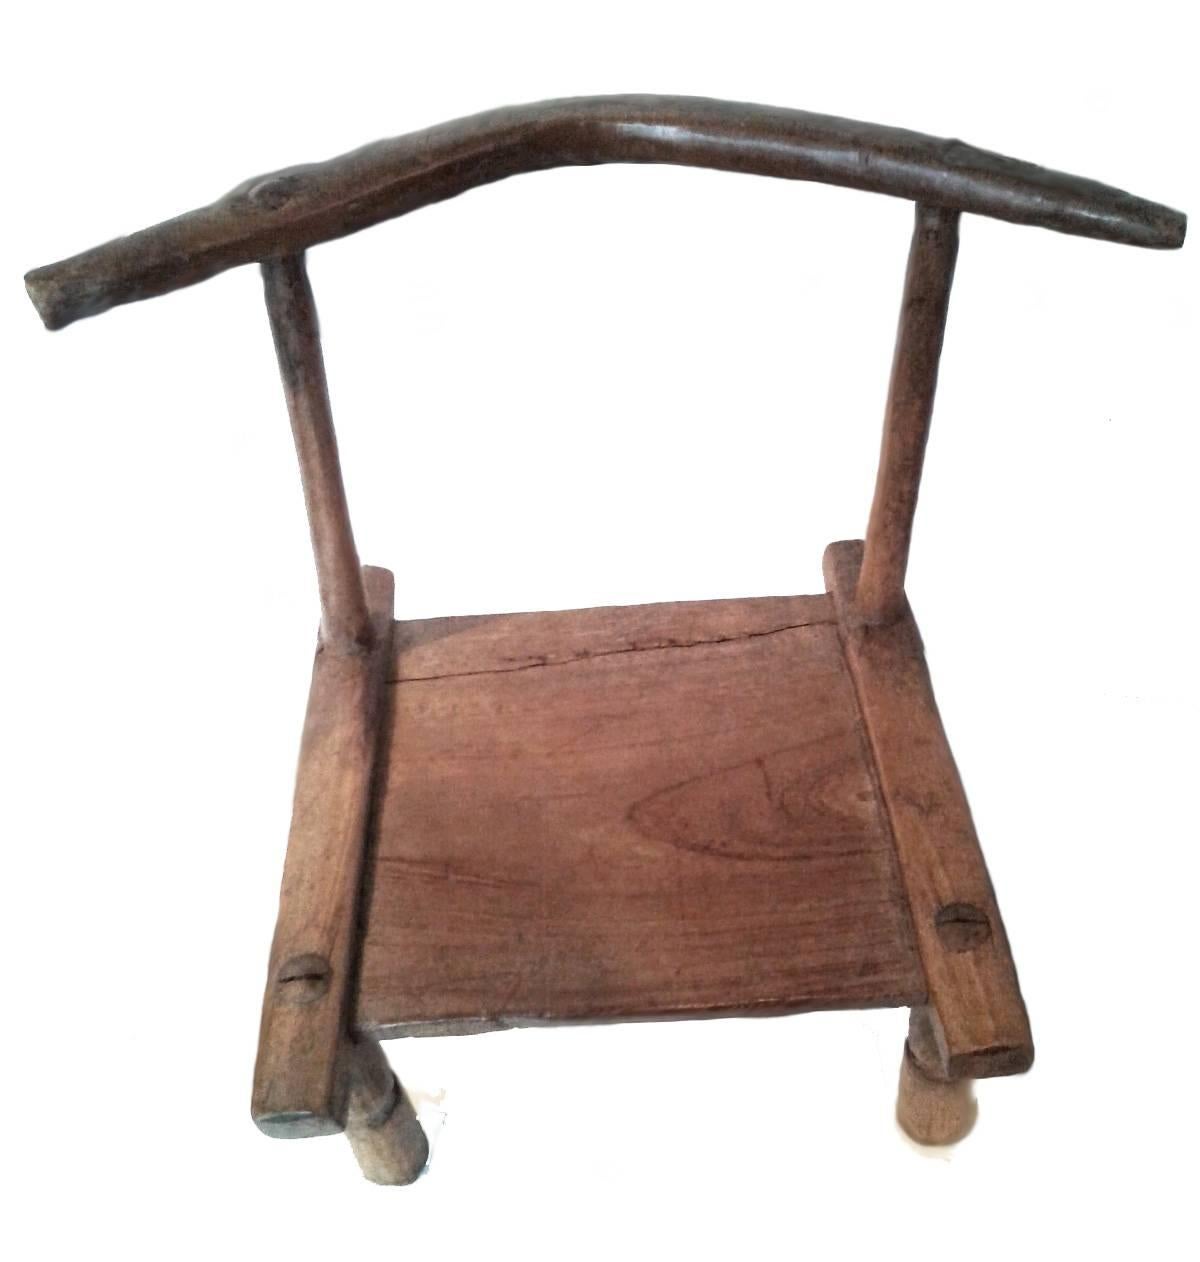 Ivorian Baule Chair from Ivory Coast